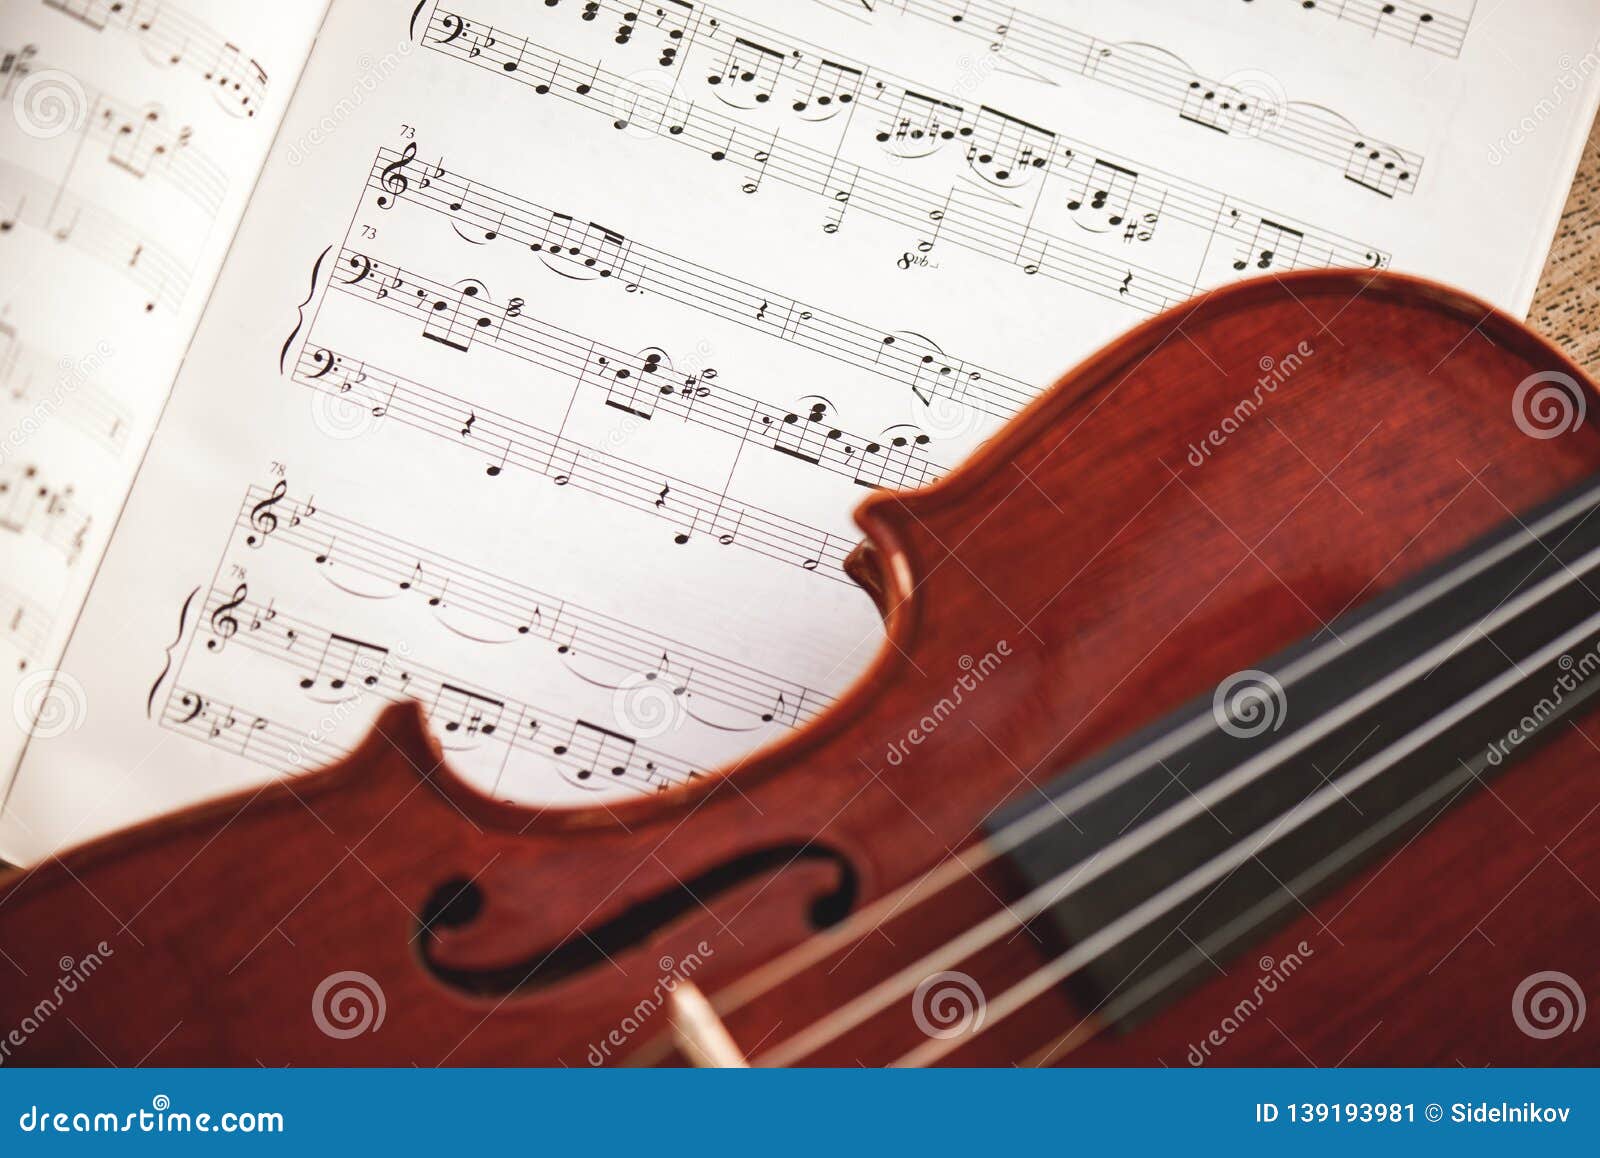 in love with classic music. close up view of brown violin lying on music score sheet. violin lessons